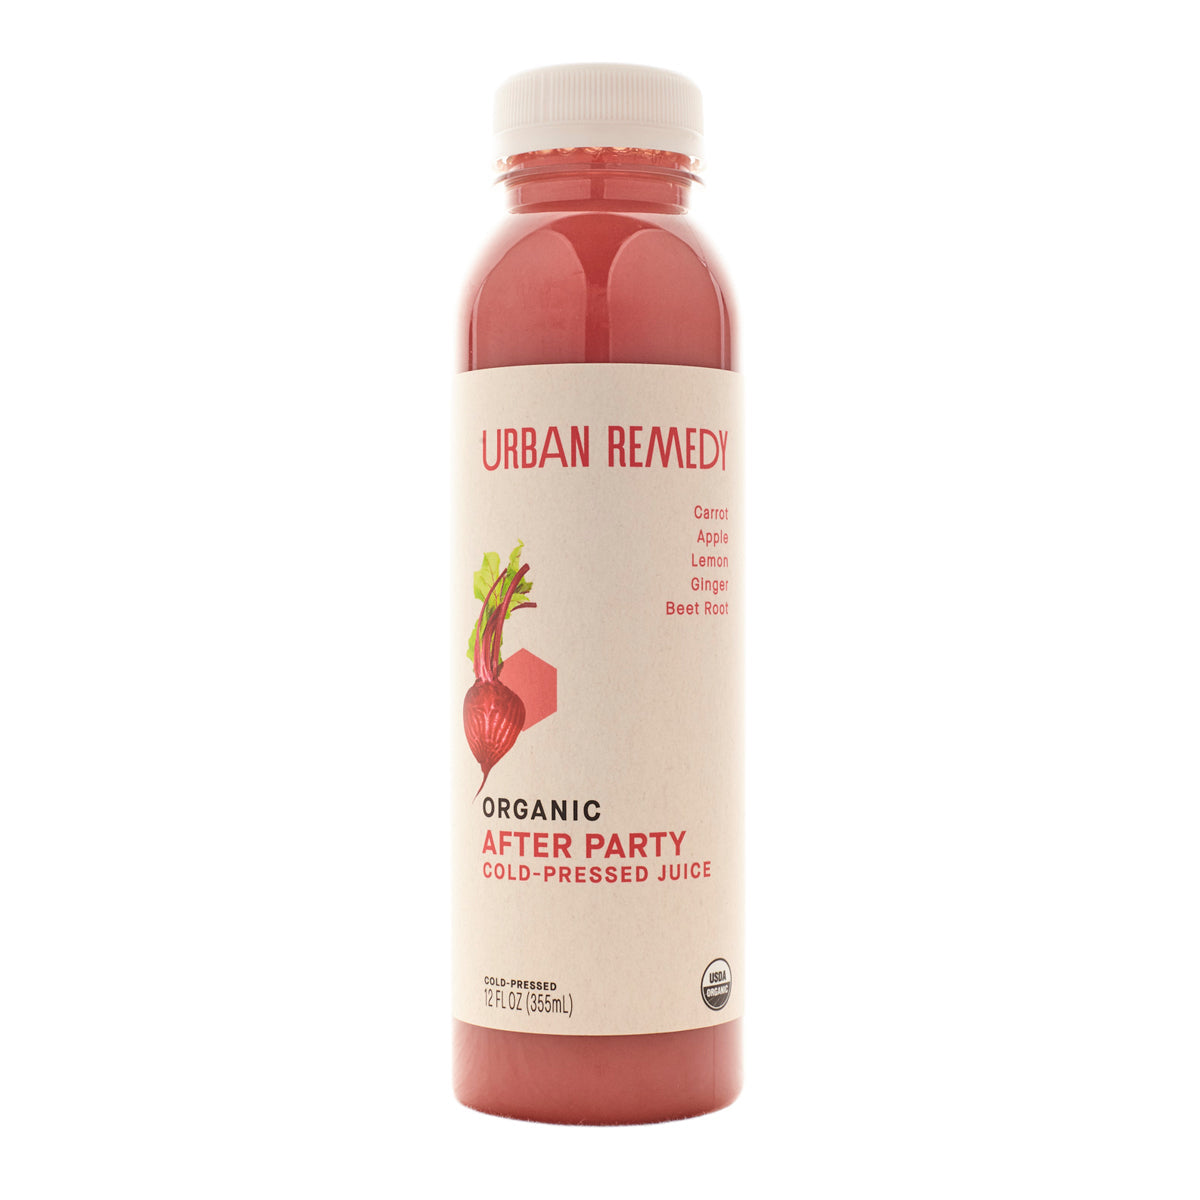 Urban Remedy After Party Juice 12 OZ